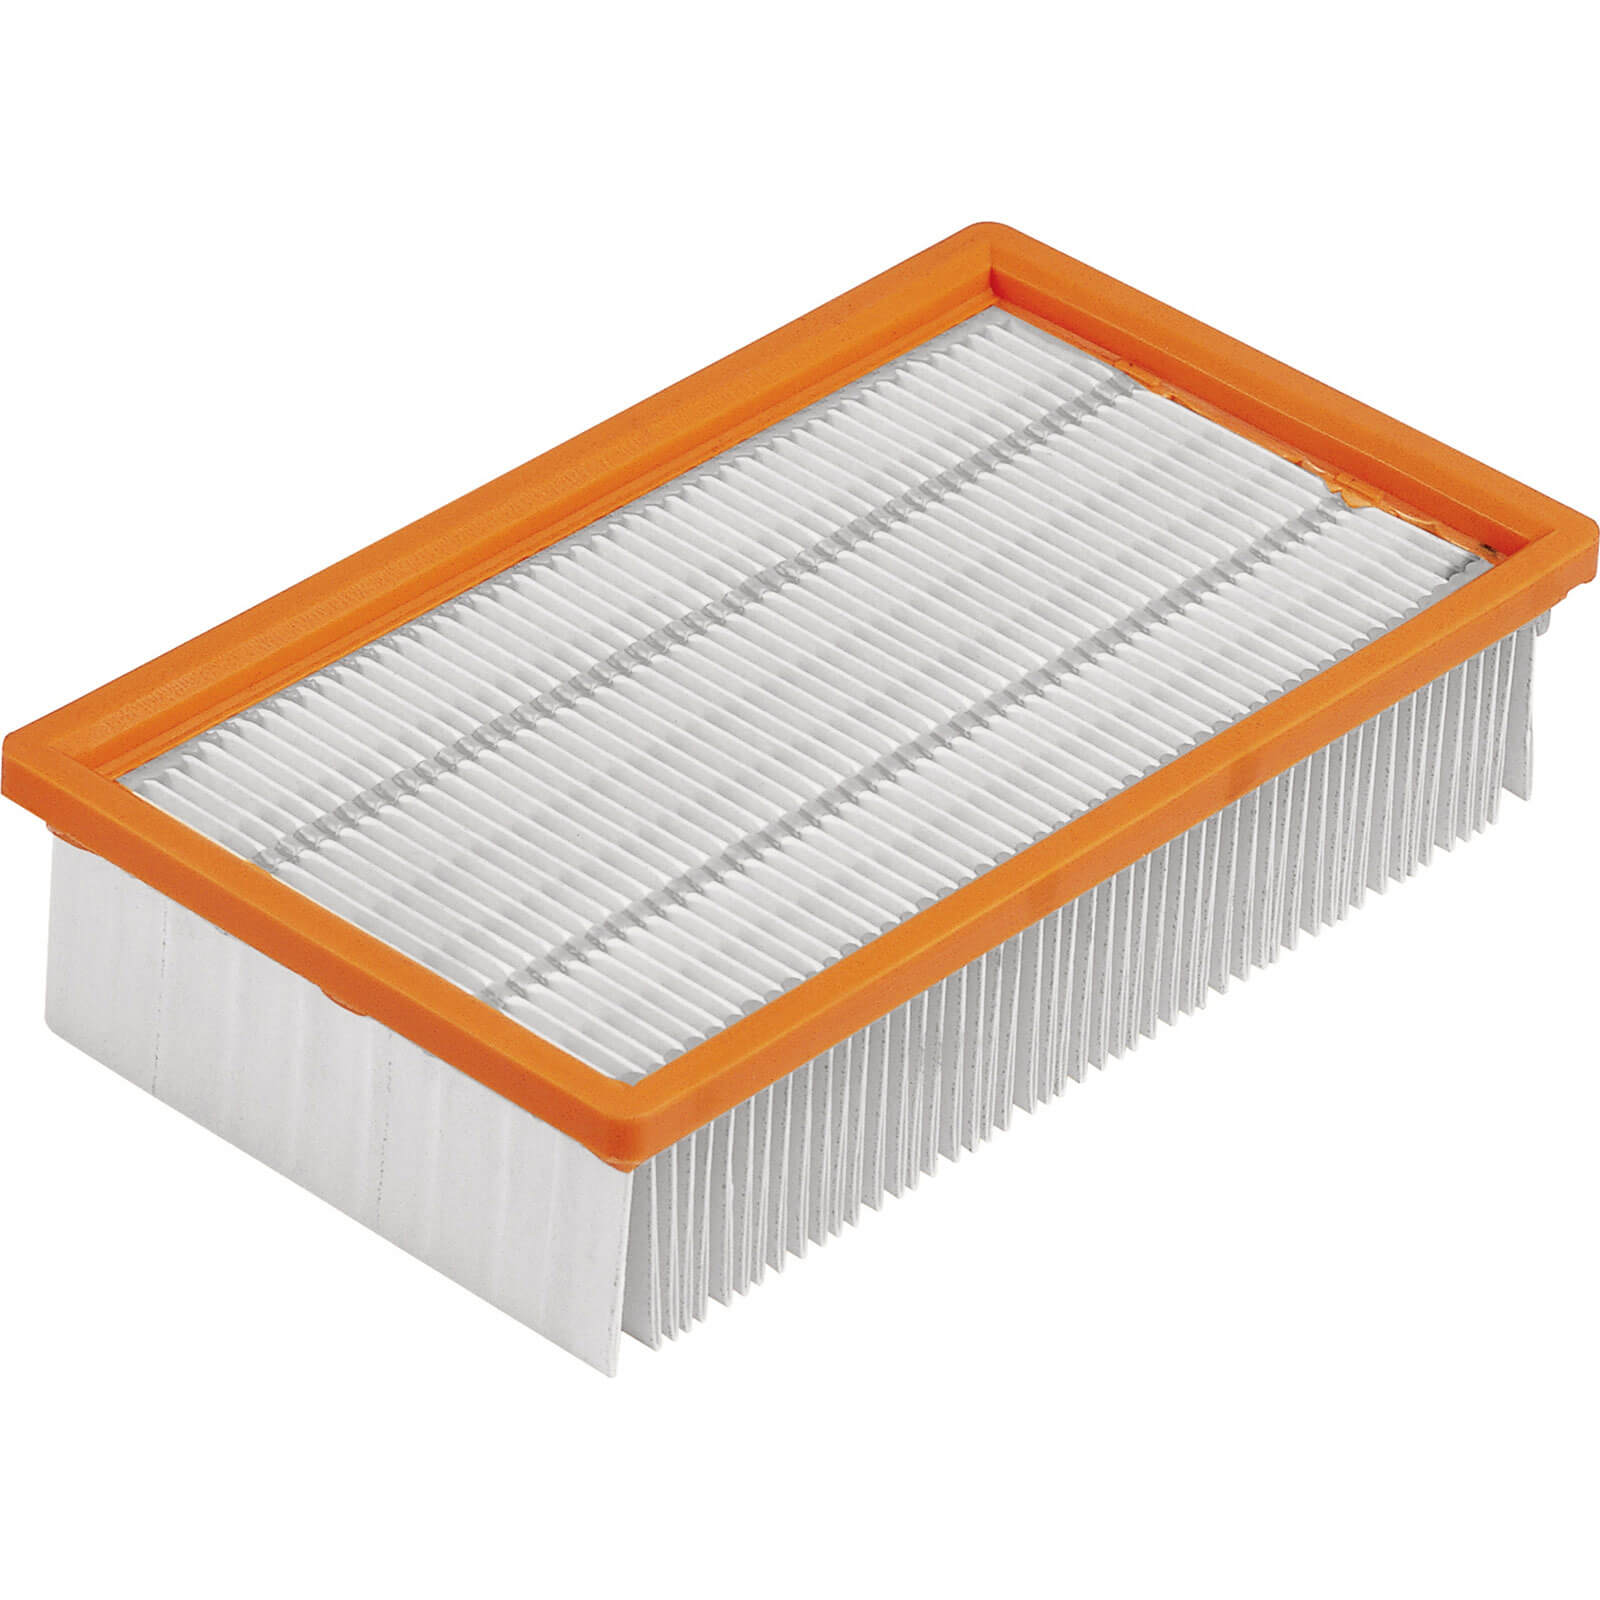 Flex Fold Flat Filter for VCE35 and VCE45 Vacuum Cleaners